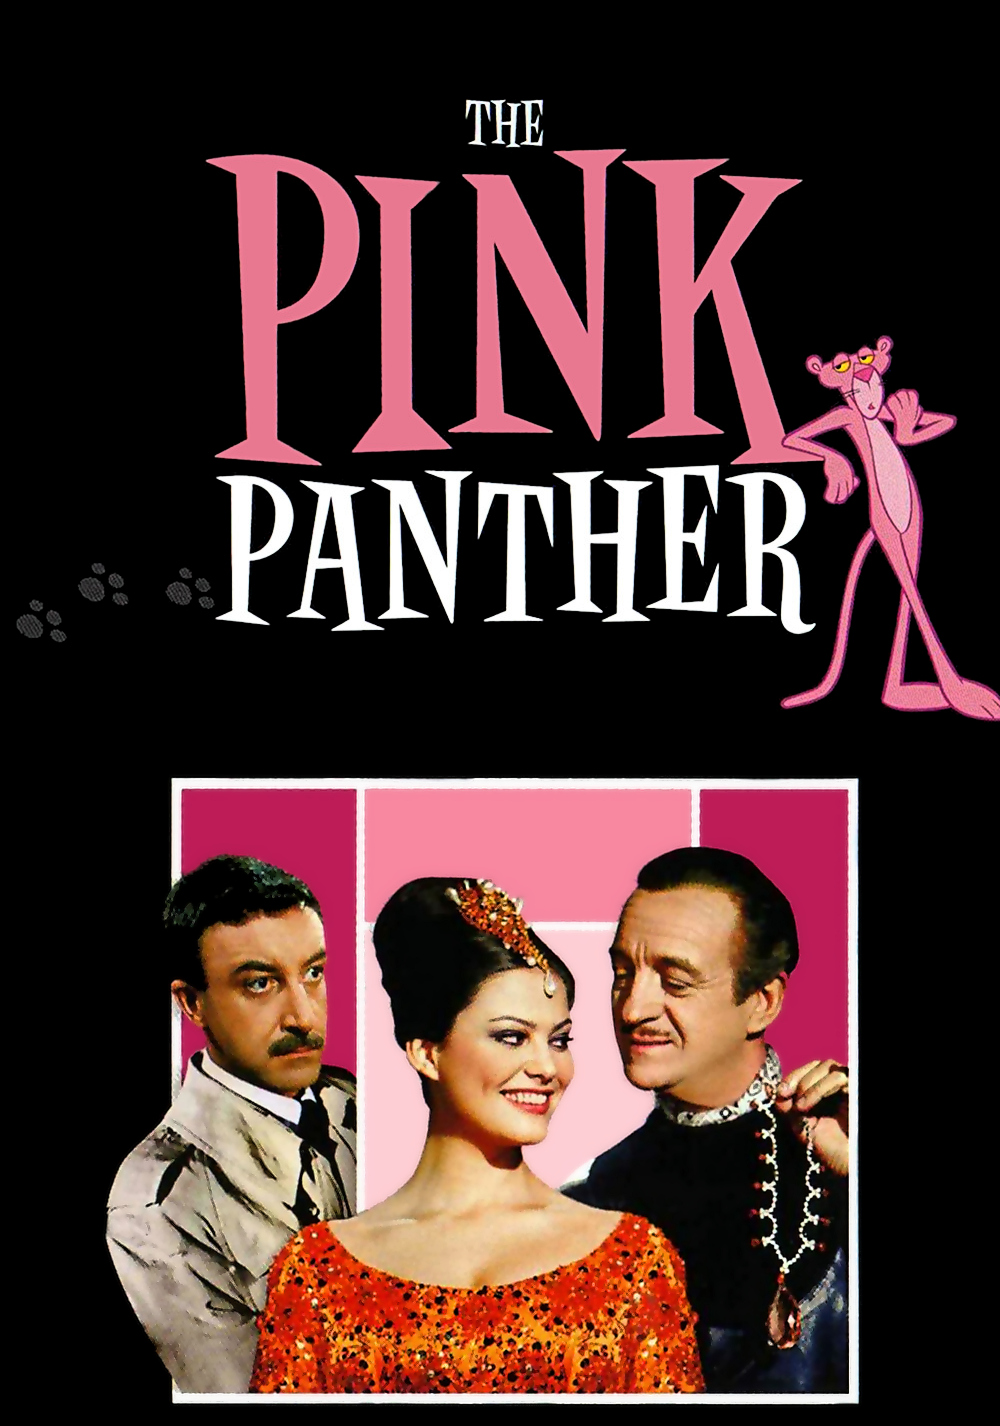 The Pink Panther (1963) Picture